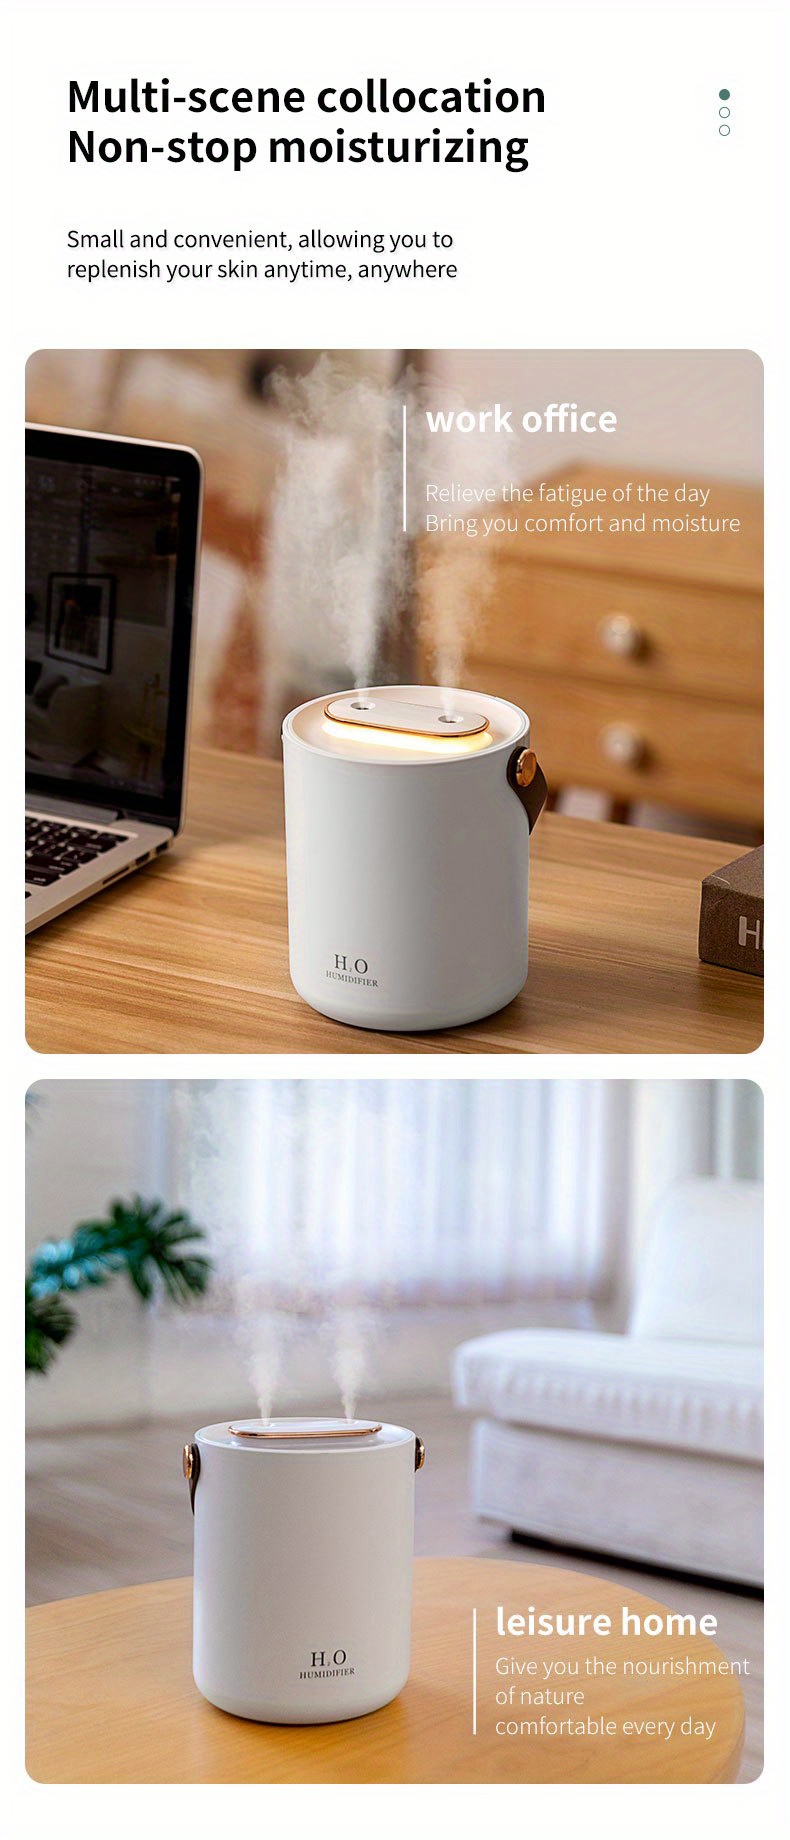 1pc portable dual spray humidifier desktop humidifier living room humidifer with night light light mist large air humidification type c plug power supply suitable for living room office car travel hotel small appliance car accessories details 9